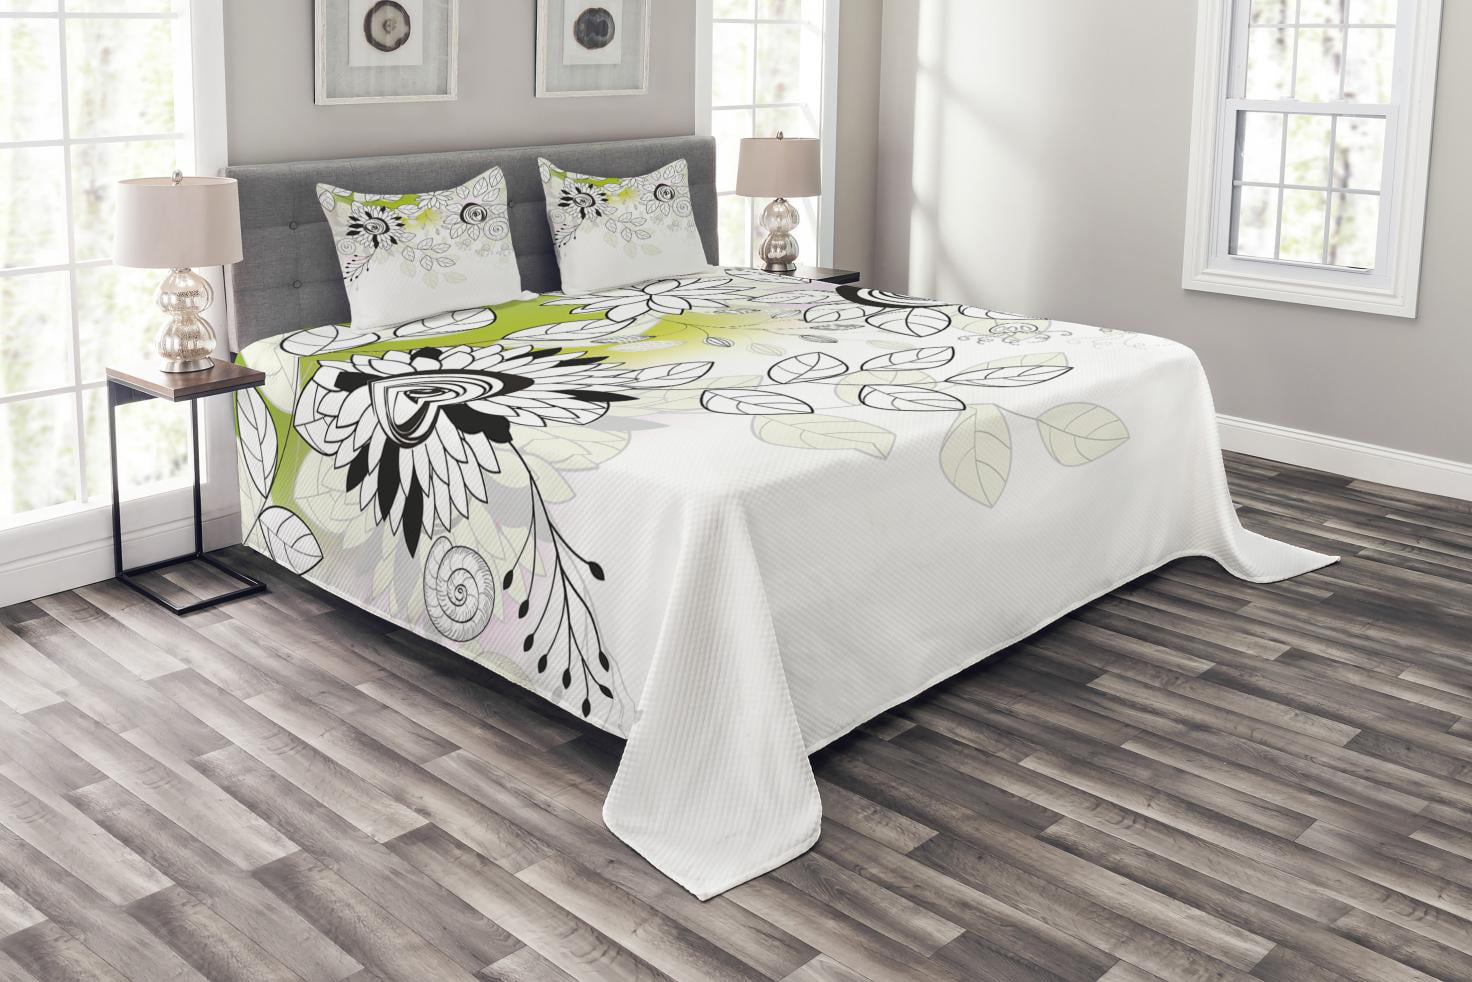 Details about   Leaves Quilted Bedspread & Pillow Shams Set Monochrome Floral Rustic Print 